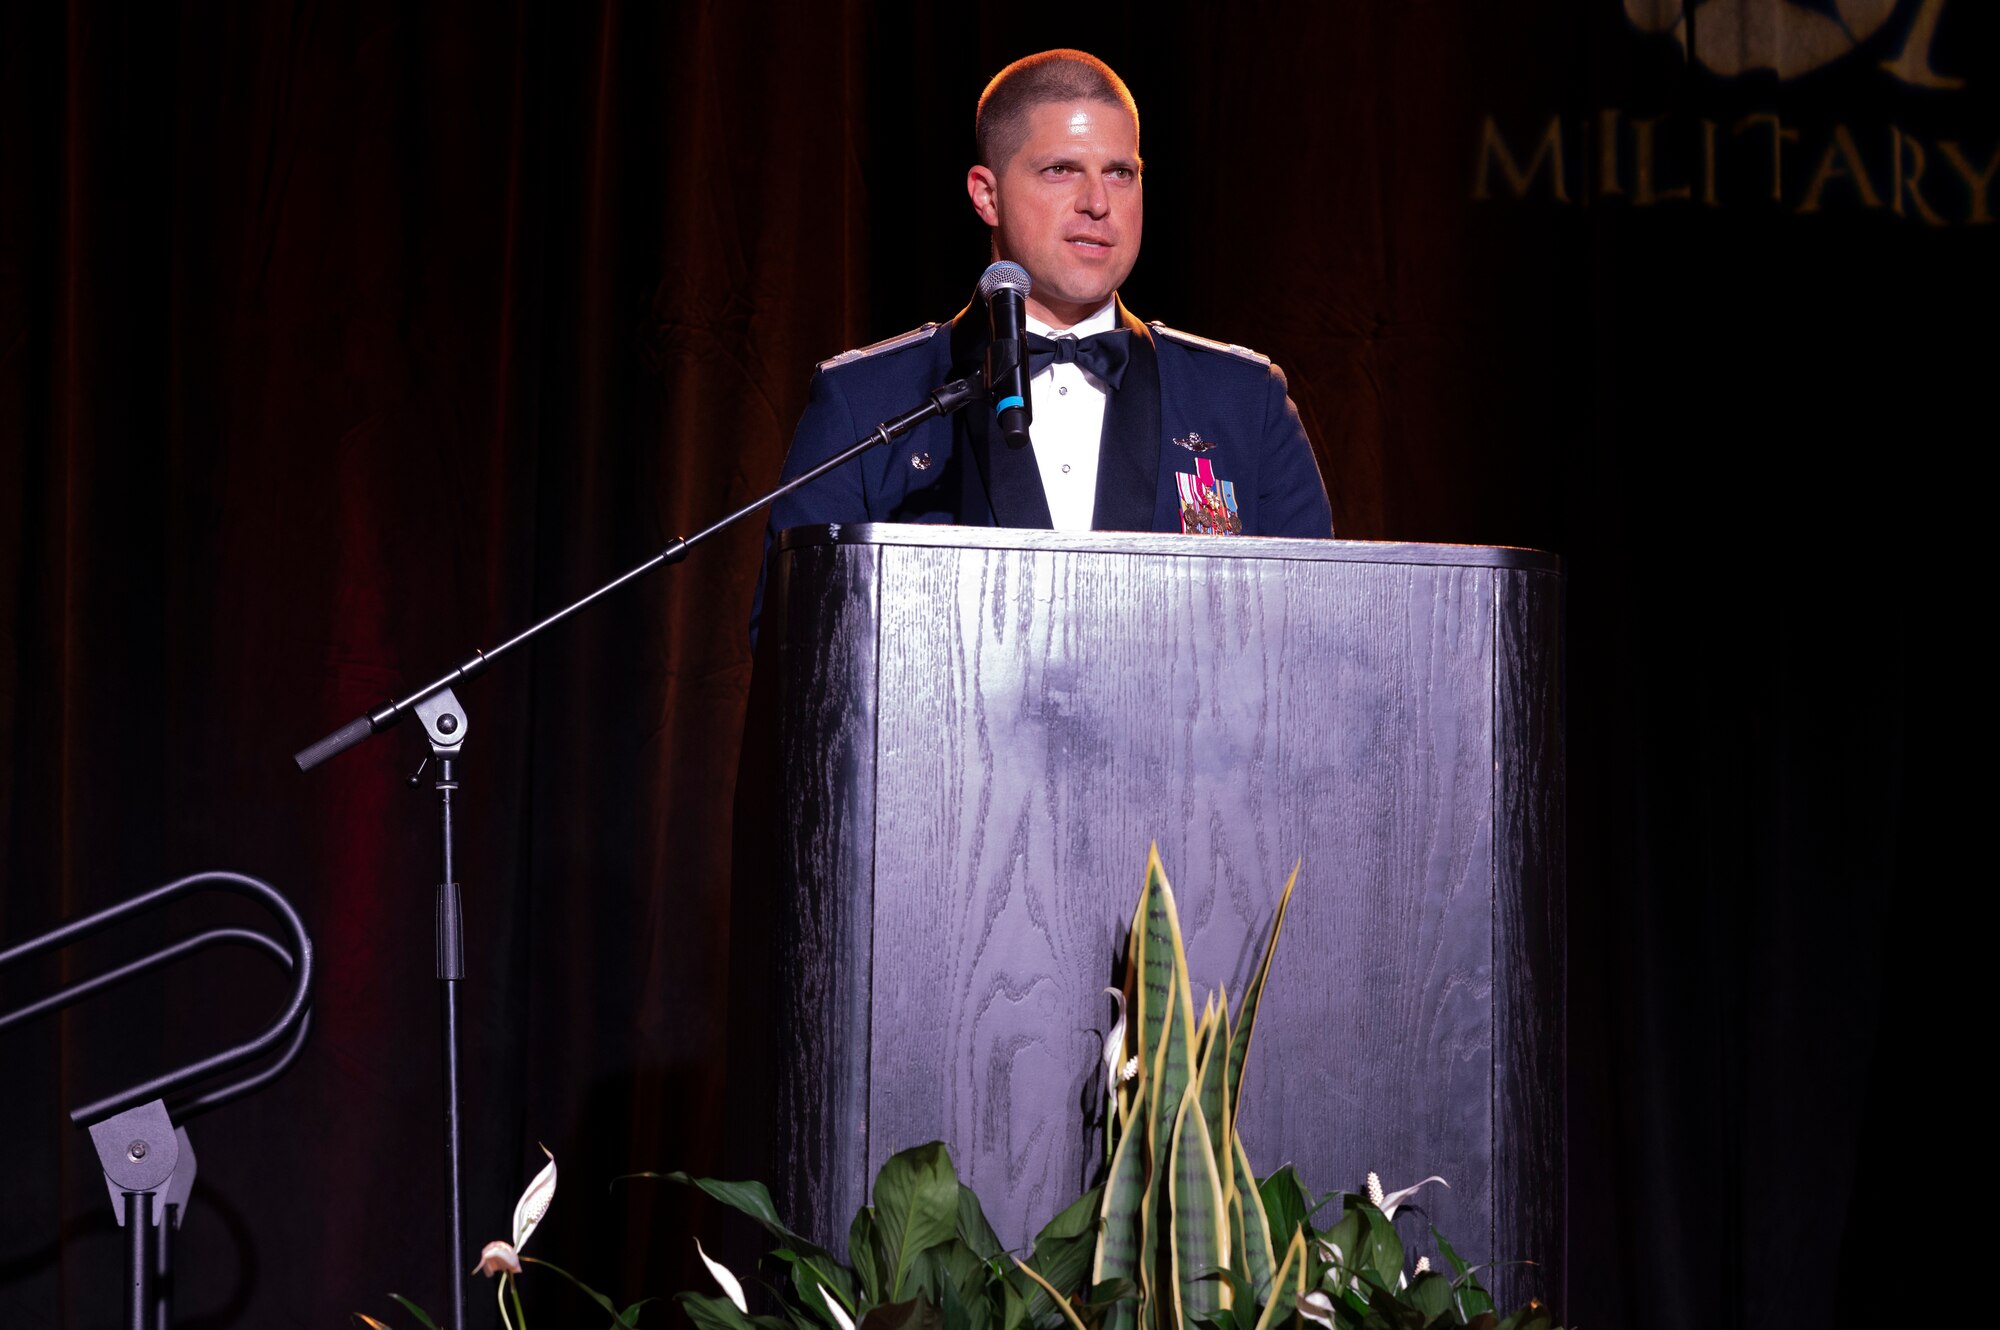 Col. Seth Spanier, 7th Bomb Wing commander, speaks at the Abilene Military Affairs Committee and Dyess Air Force Gala in Abilene, Texas, Aug. 26, 2023. This year’s gala celebrated 76 years of Air Force heritage alongside 70 years of the the 70th anniversary of the Abilene MAC, working consistently to ensure a thriving and supportive relationship between Dyess and the Abilene community. The MAC showed its appreciation to Dyess Airmen and their families by providing free food, entertainment and childcare.